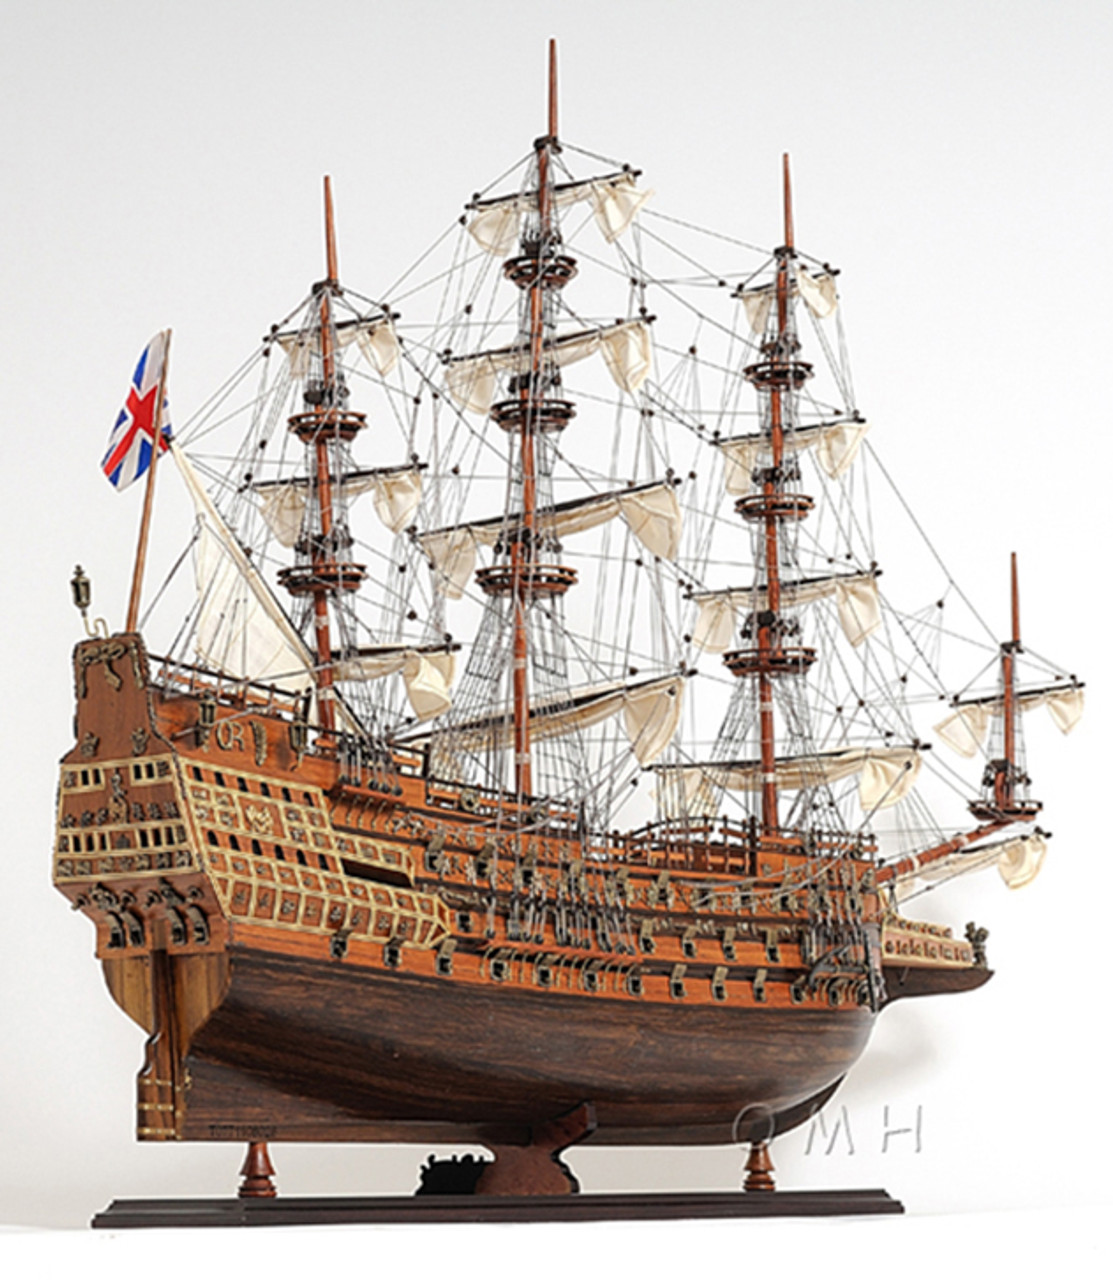 HMS Sovereign of the Seas Tall Ship Wood Model